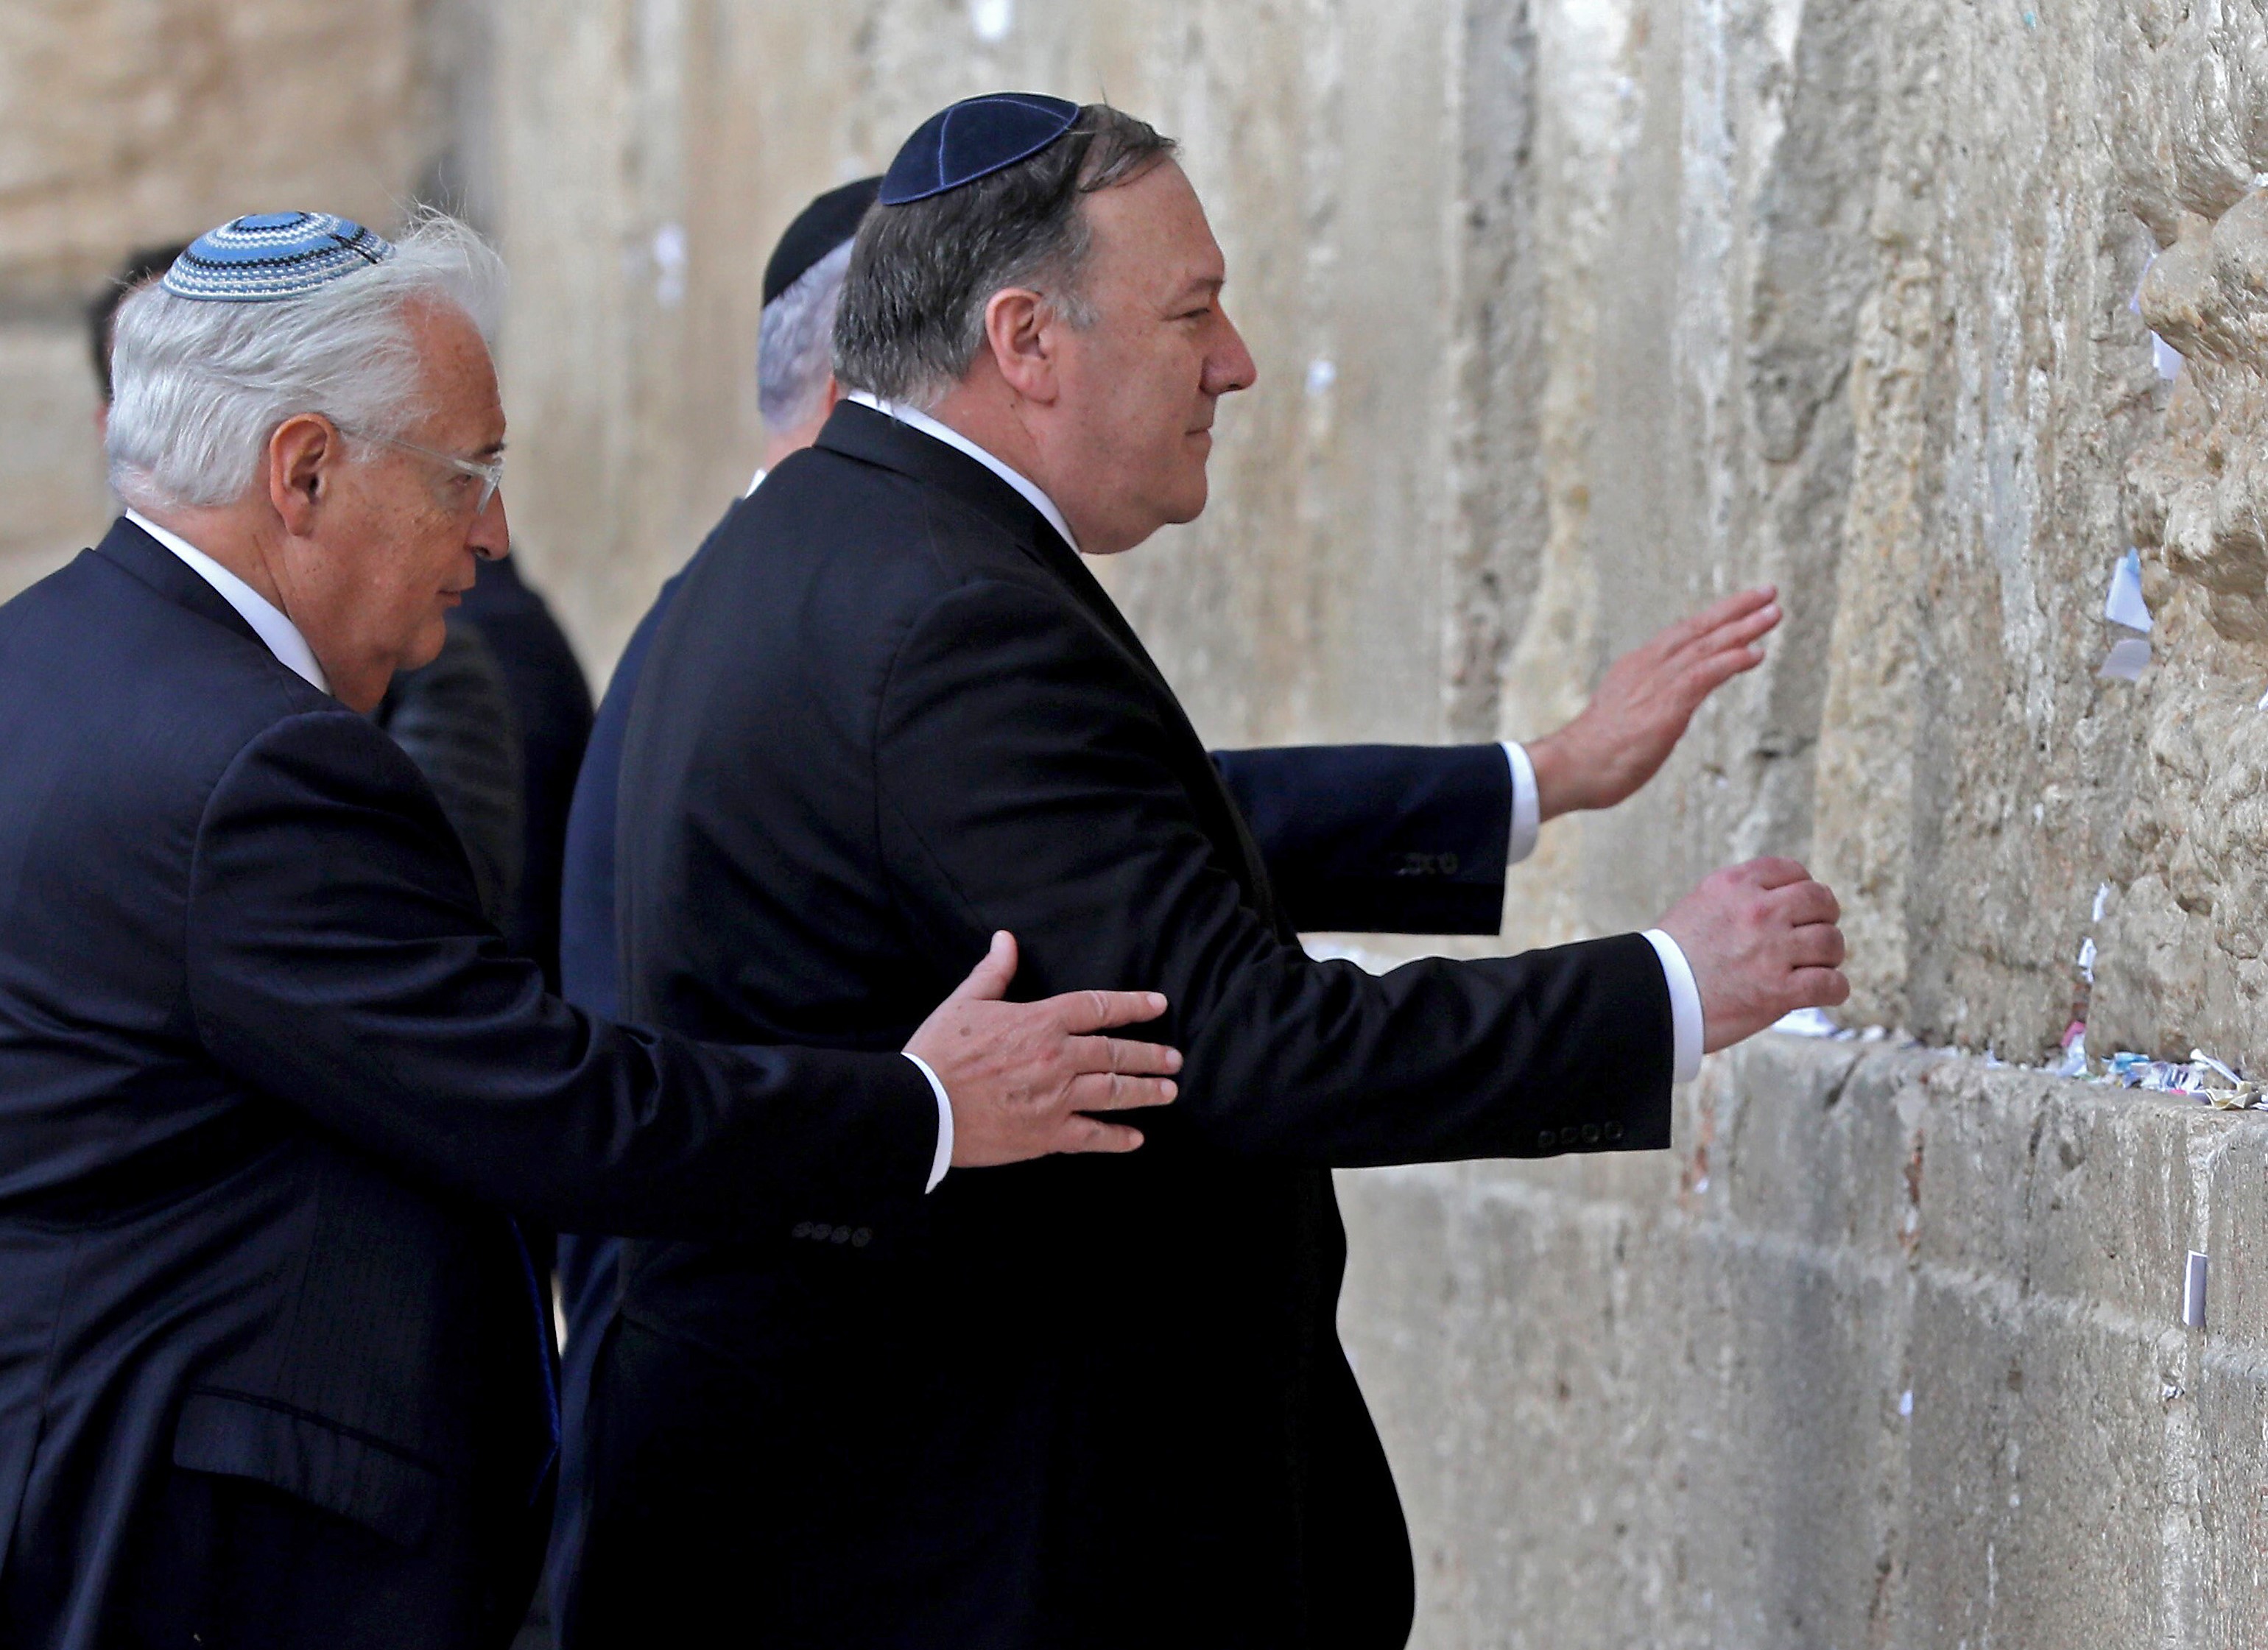 US Secretary of State Mike Pompeo (R), accompanied by US ambassador to Israel David Friedman (L), prays at the Western Wall in Jerusalem's Old City on March 21, 2019